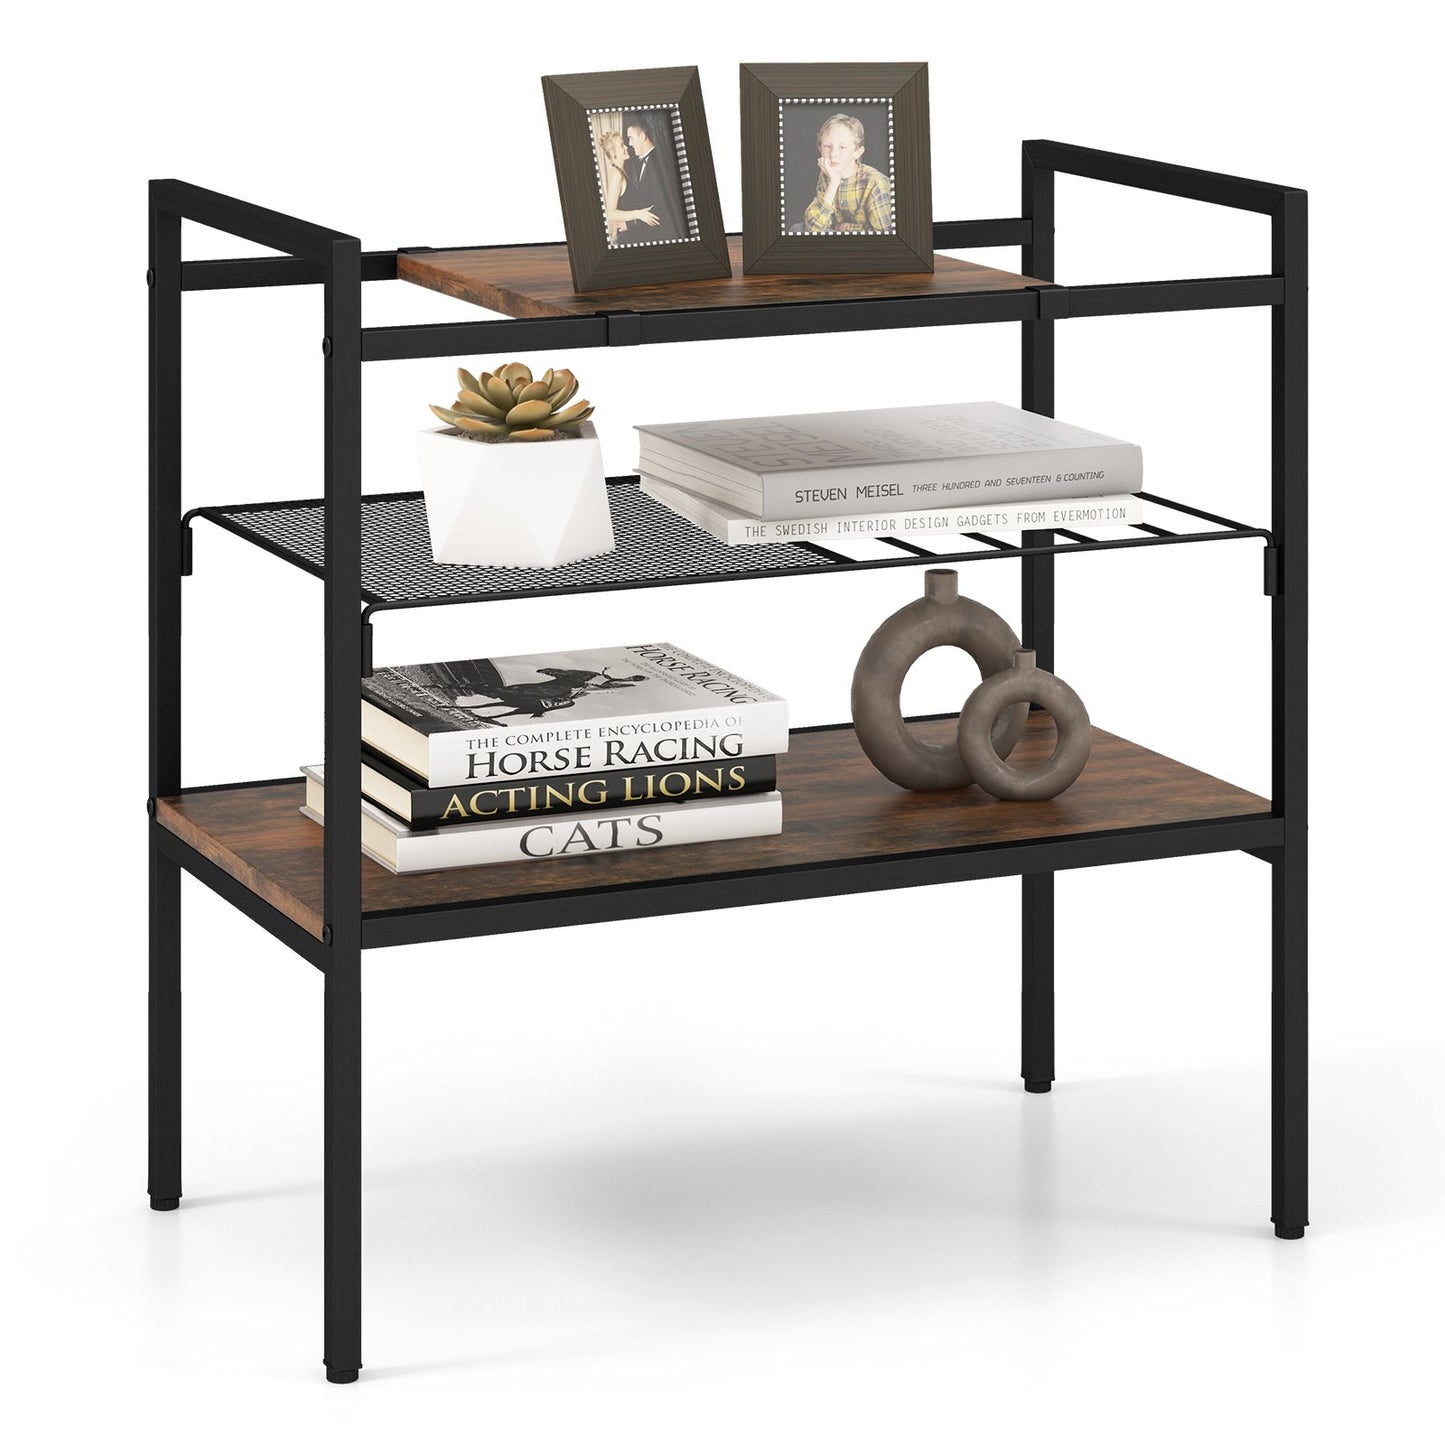 Industrial Entryway Table with Removable Panel and Mesh Shelf, Rustic Brown